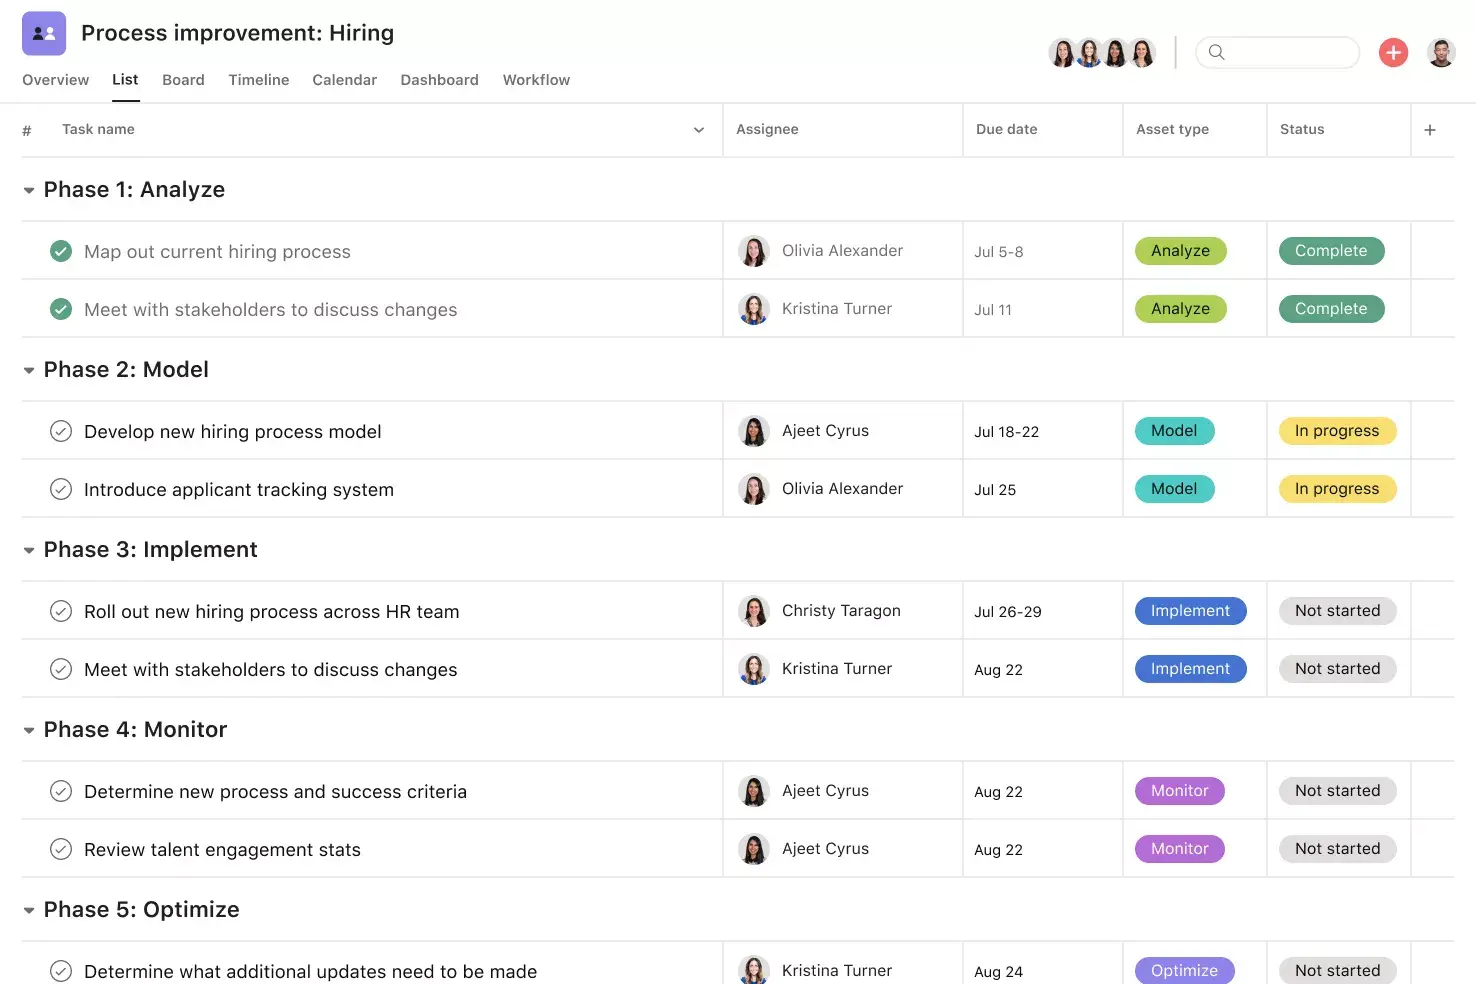 [Product UI] business process management, process improvement project in Asana, spreasheet-style project view (list)